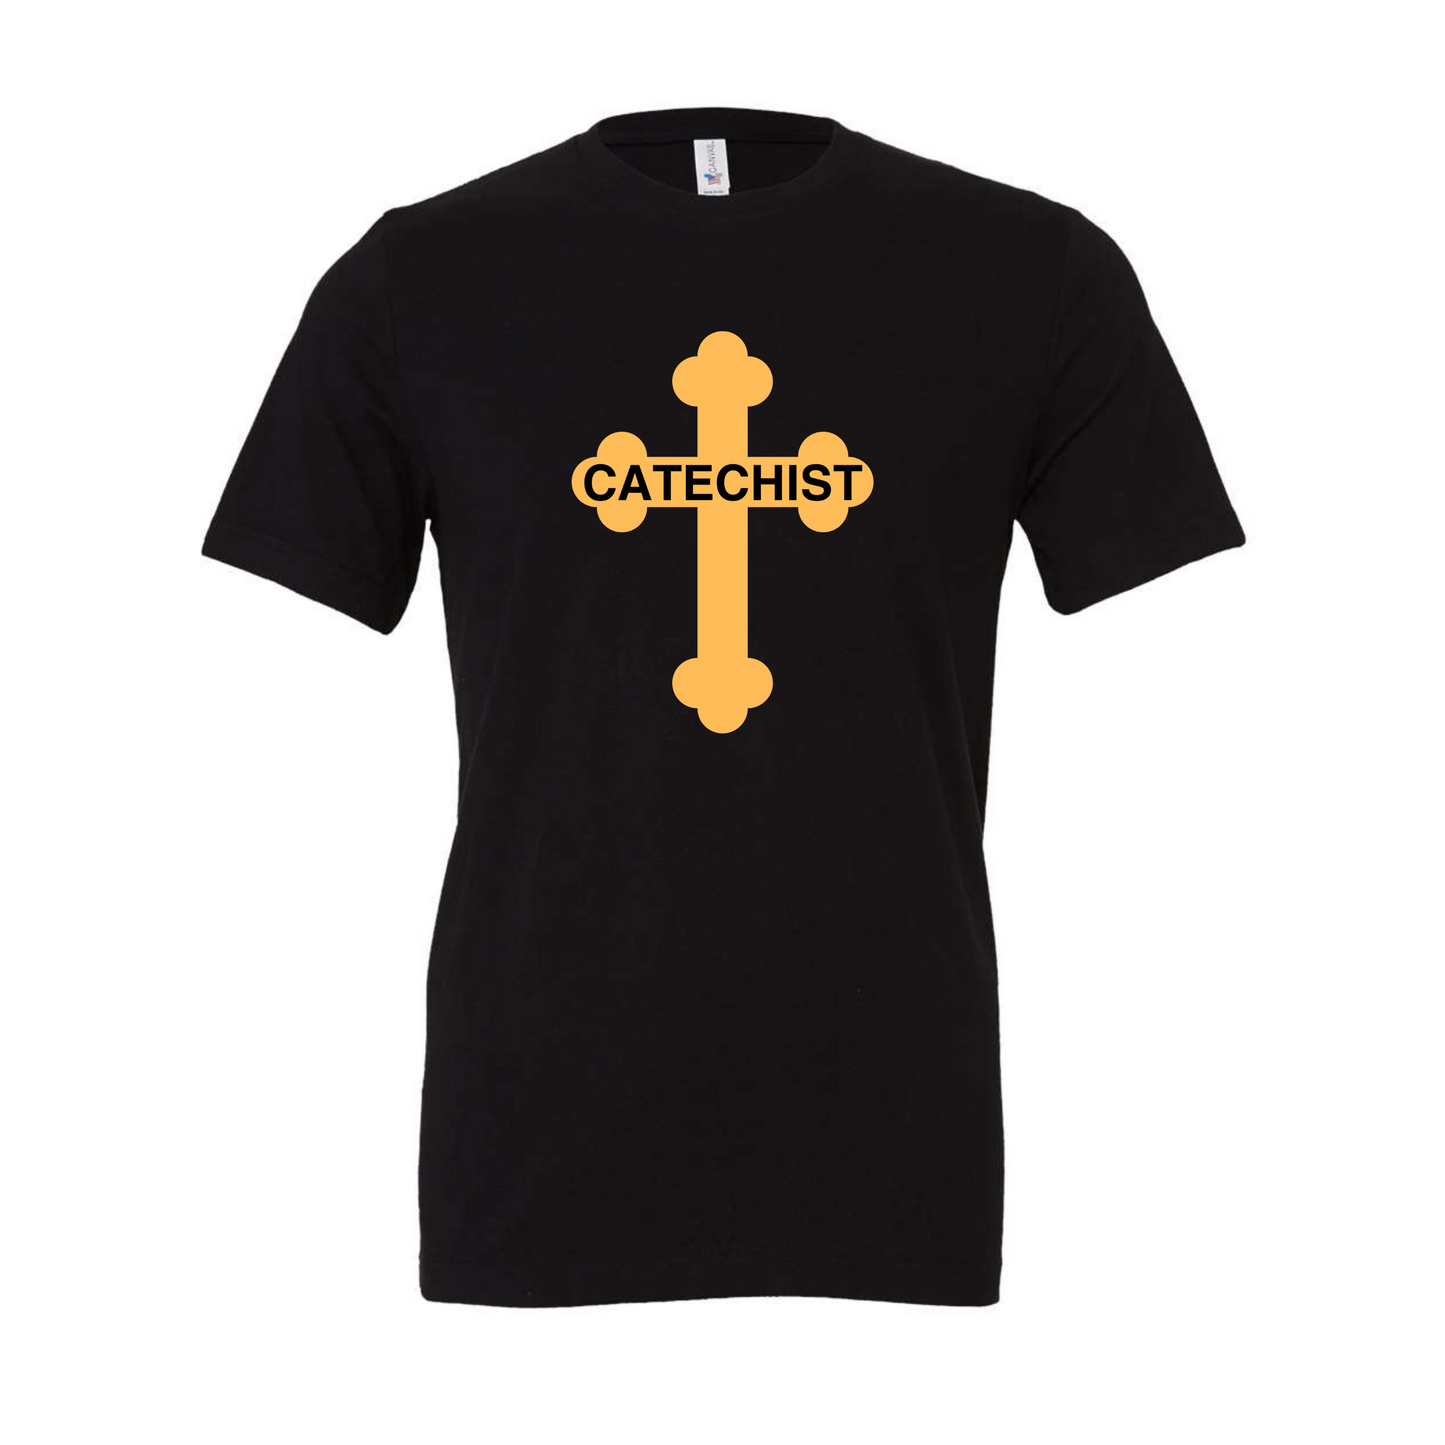 Catechist Jersey Tee